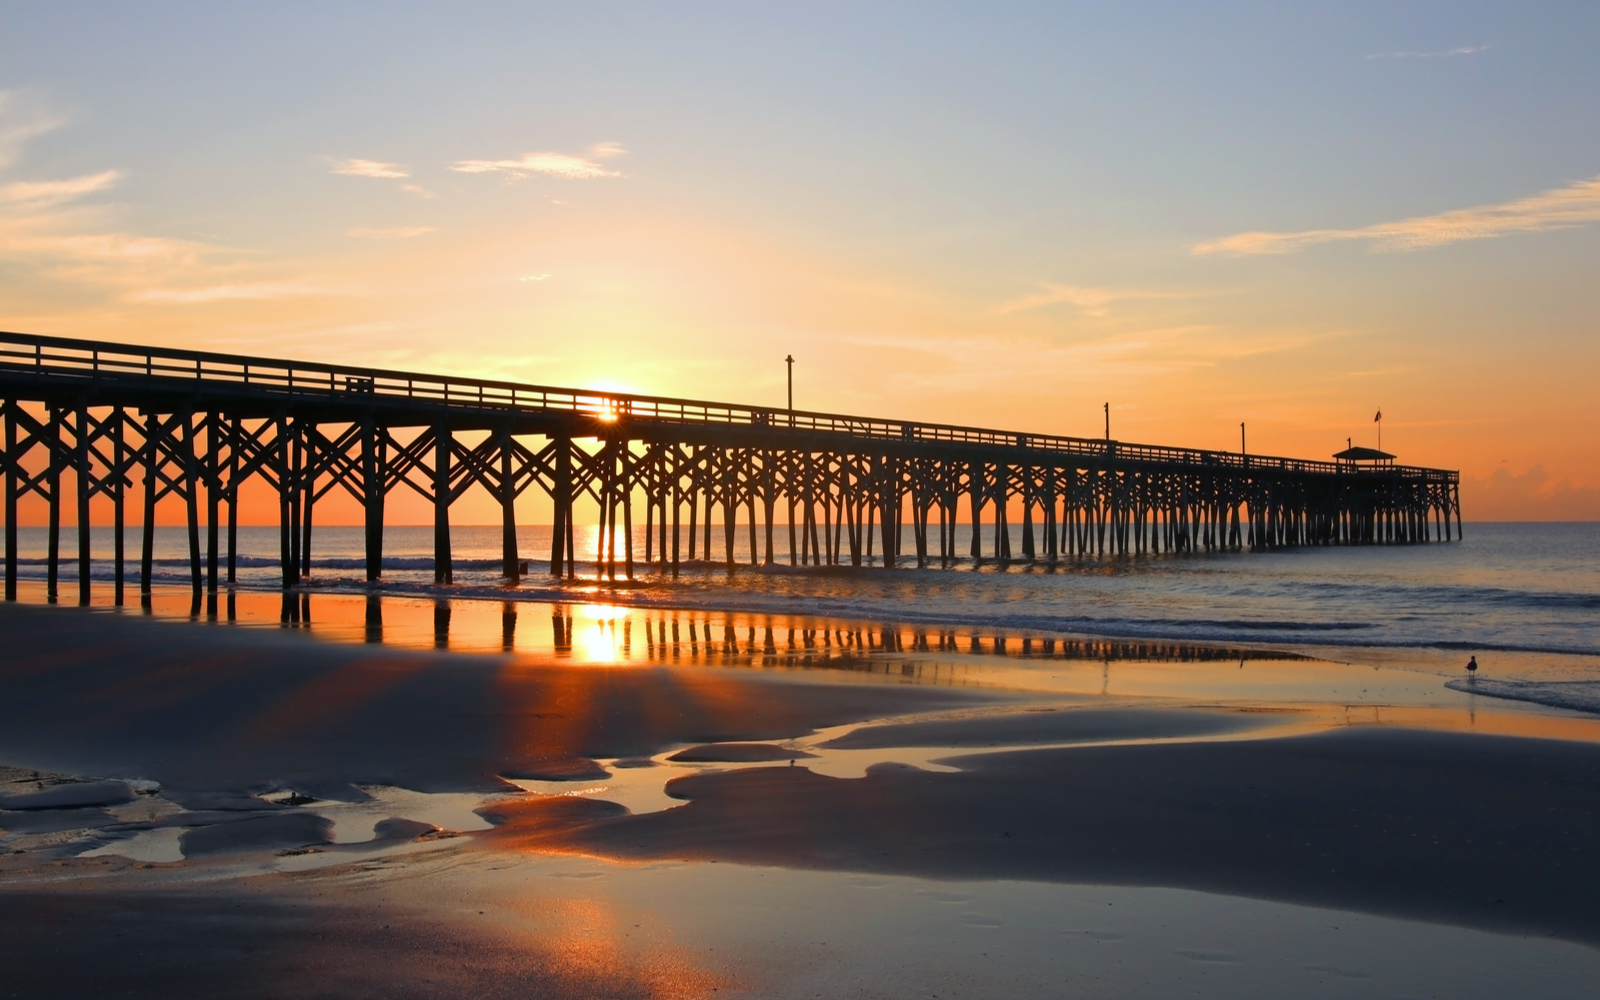 Gorgeous morning view of the pier, one of the best things to do in Myrtle Beach